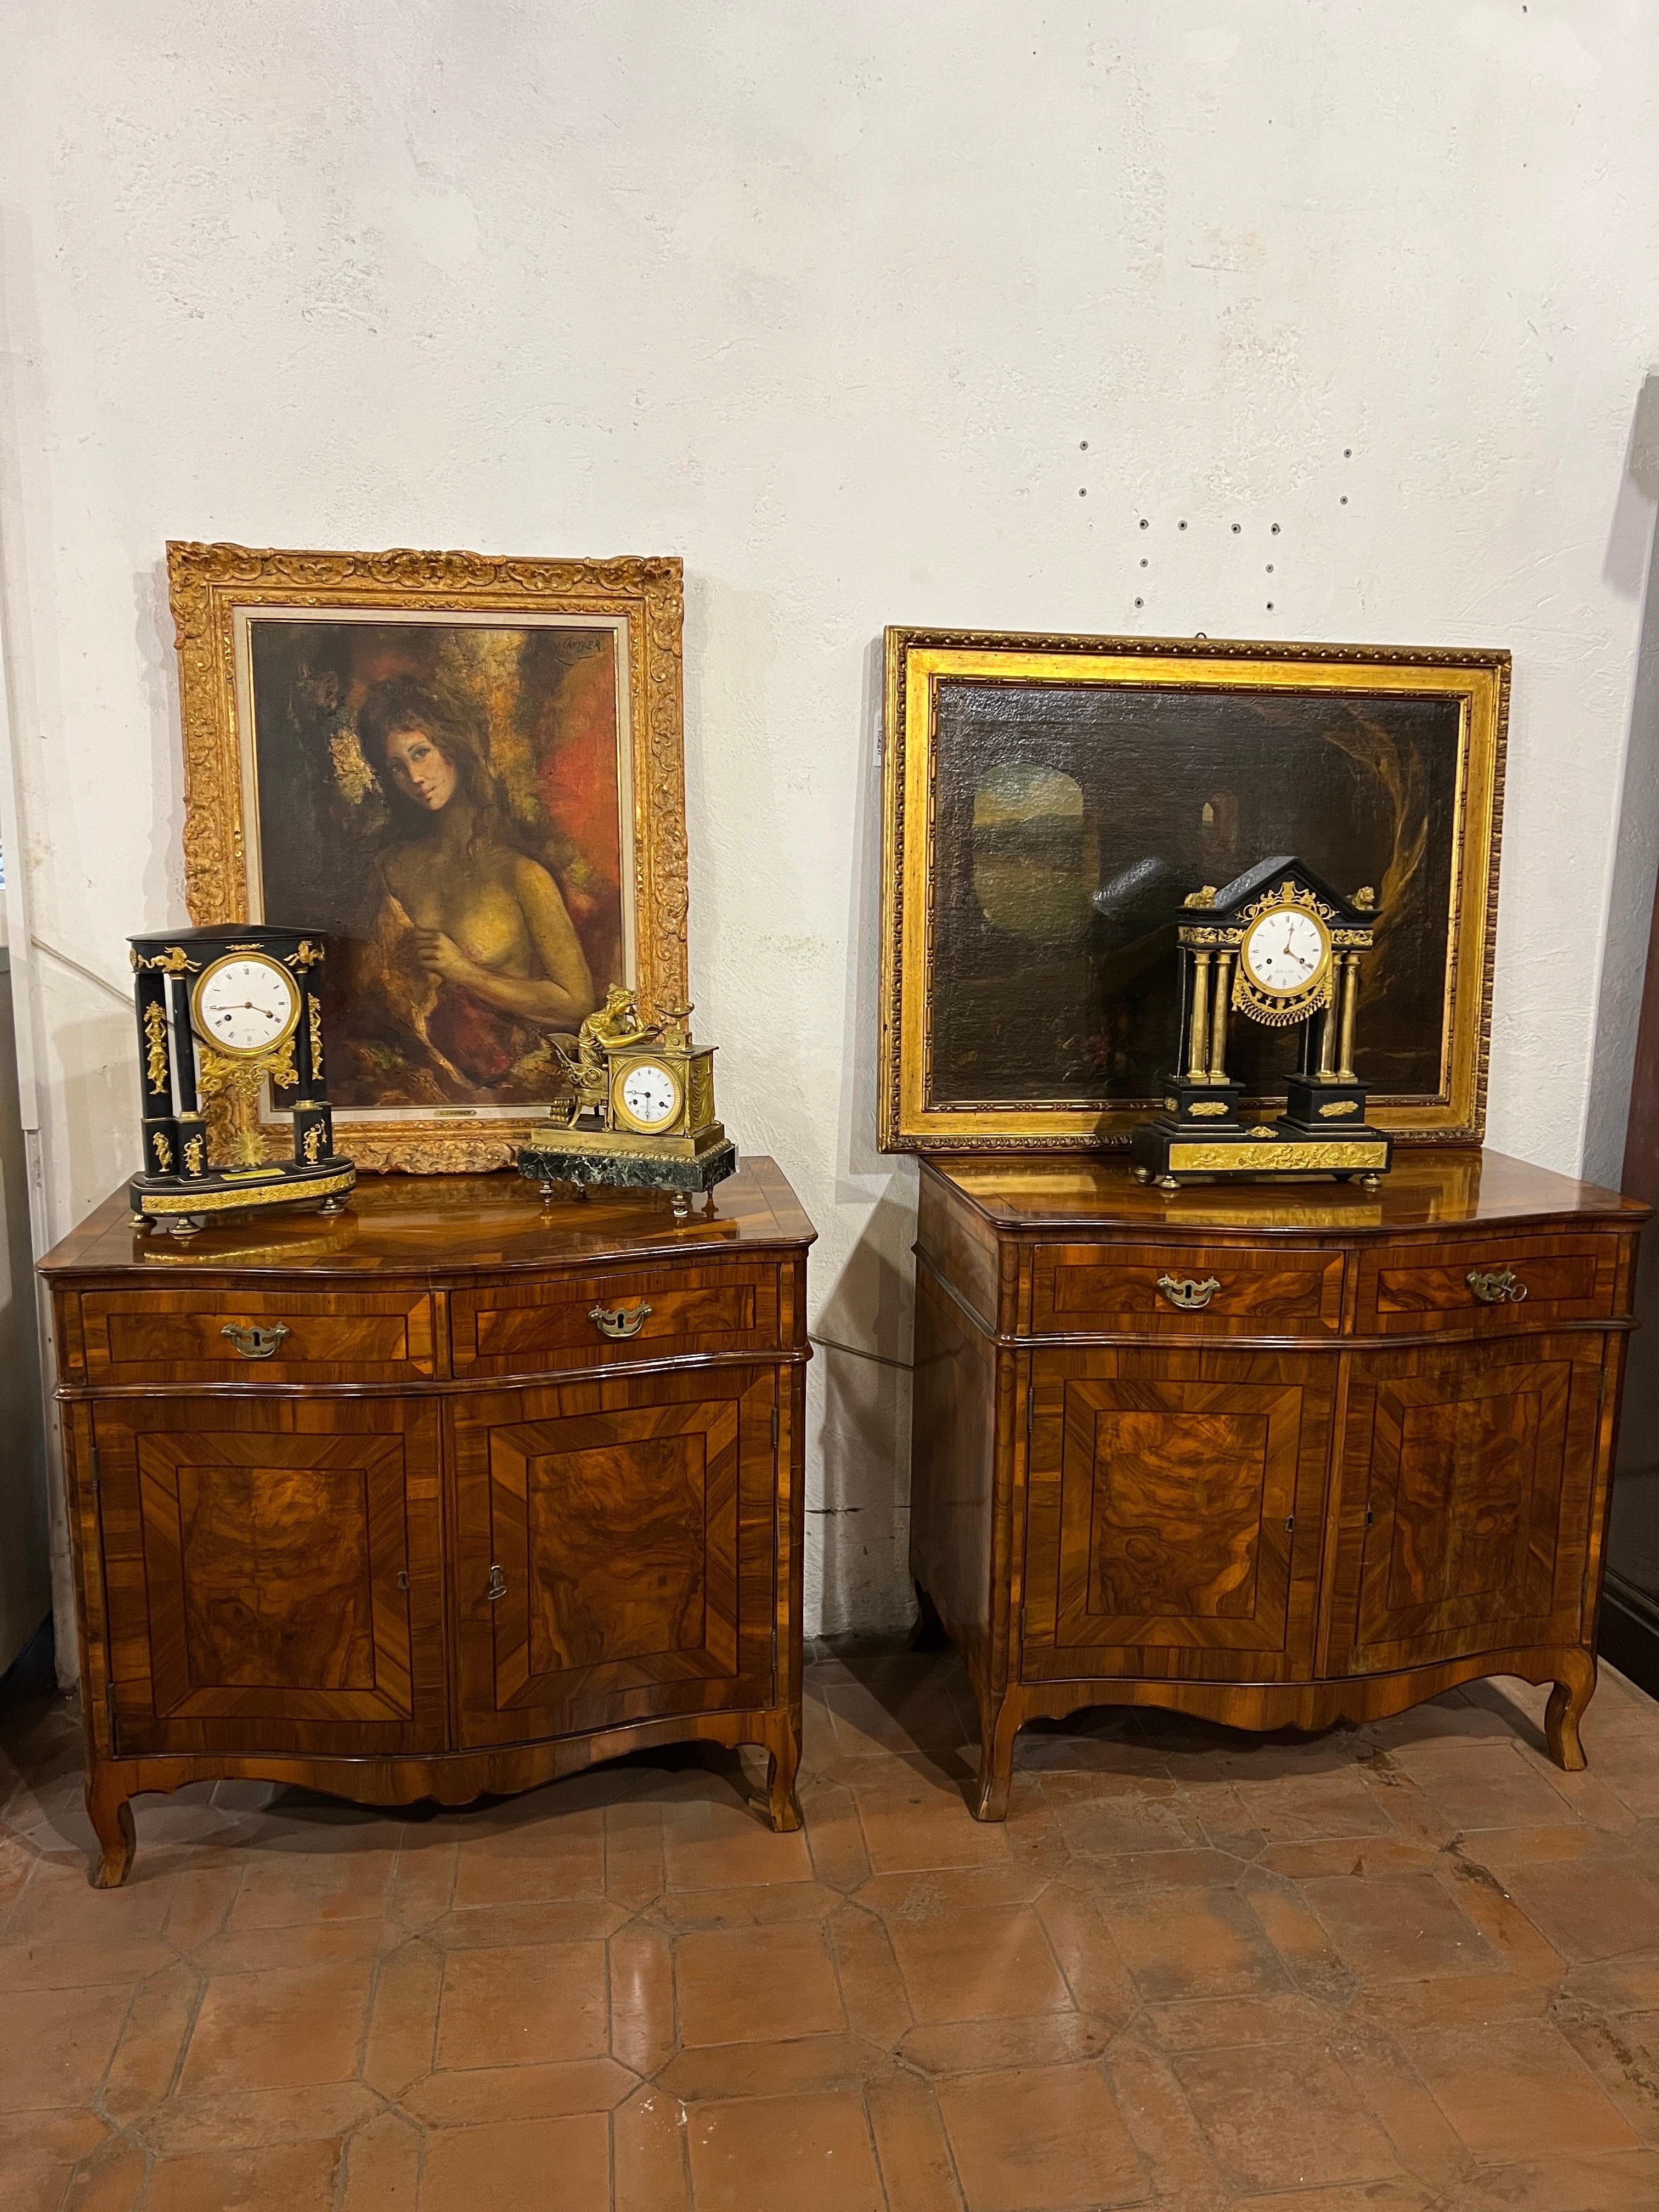 Fantastic and rare pair of Italian moved sideboards, from the Veneto region ( possibly City of Verona), made of walnut wood and inlaid with fruit wood. 
Mid-18th century era.
Moved crossbow on the front and embellished with a fine play of wood